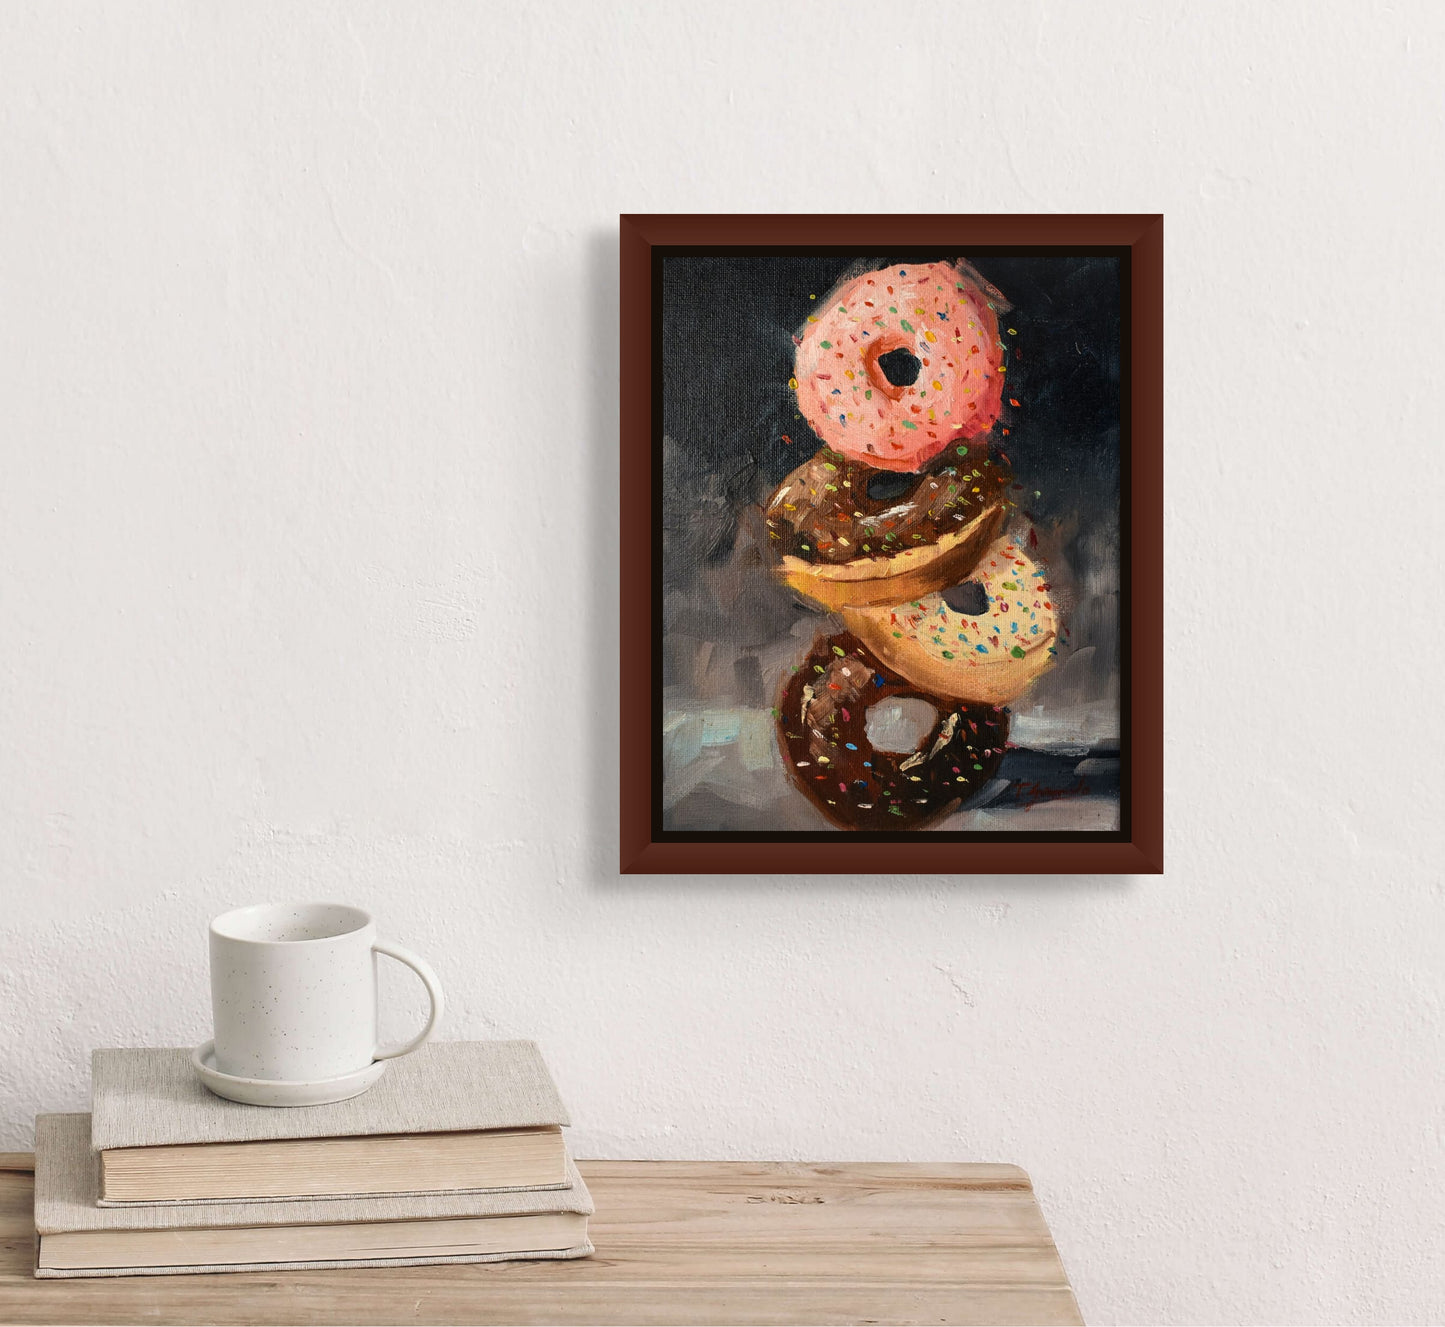 Four iced donuts balancing on one another. Donuts are strawberry, vanilla and chocolate sprinkles; shown in situ;  artist Teri Gammalo; 8"Wx10"H